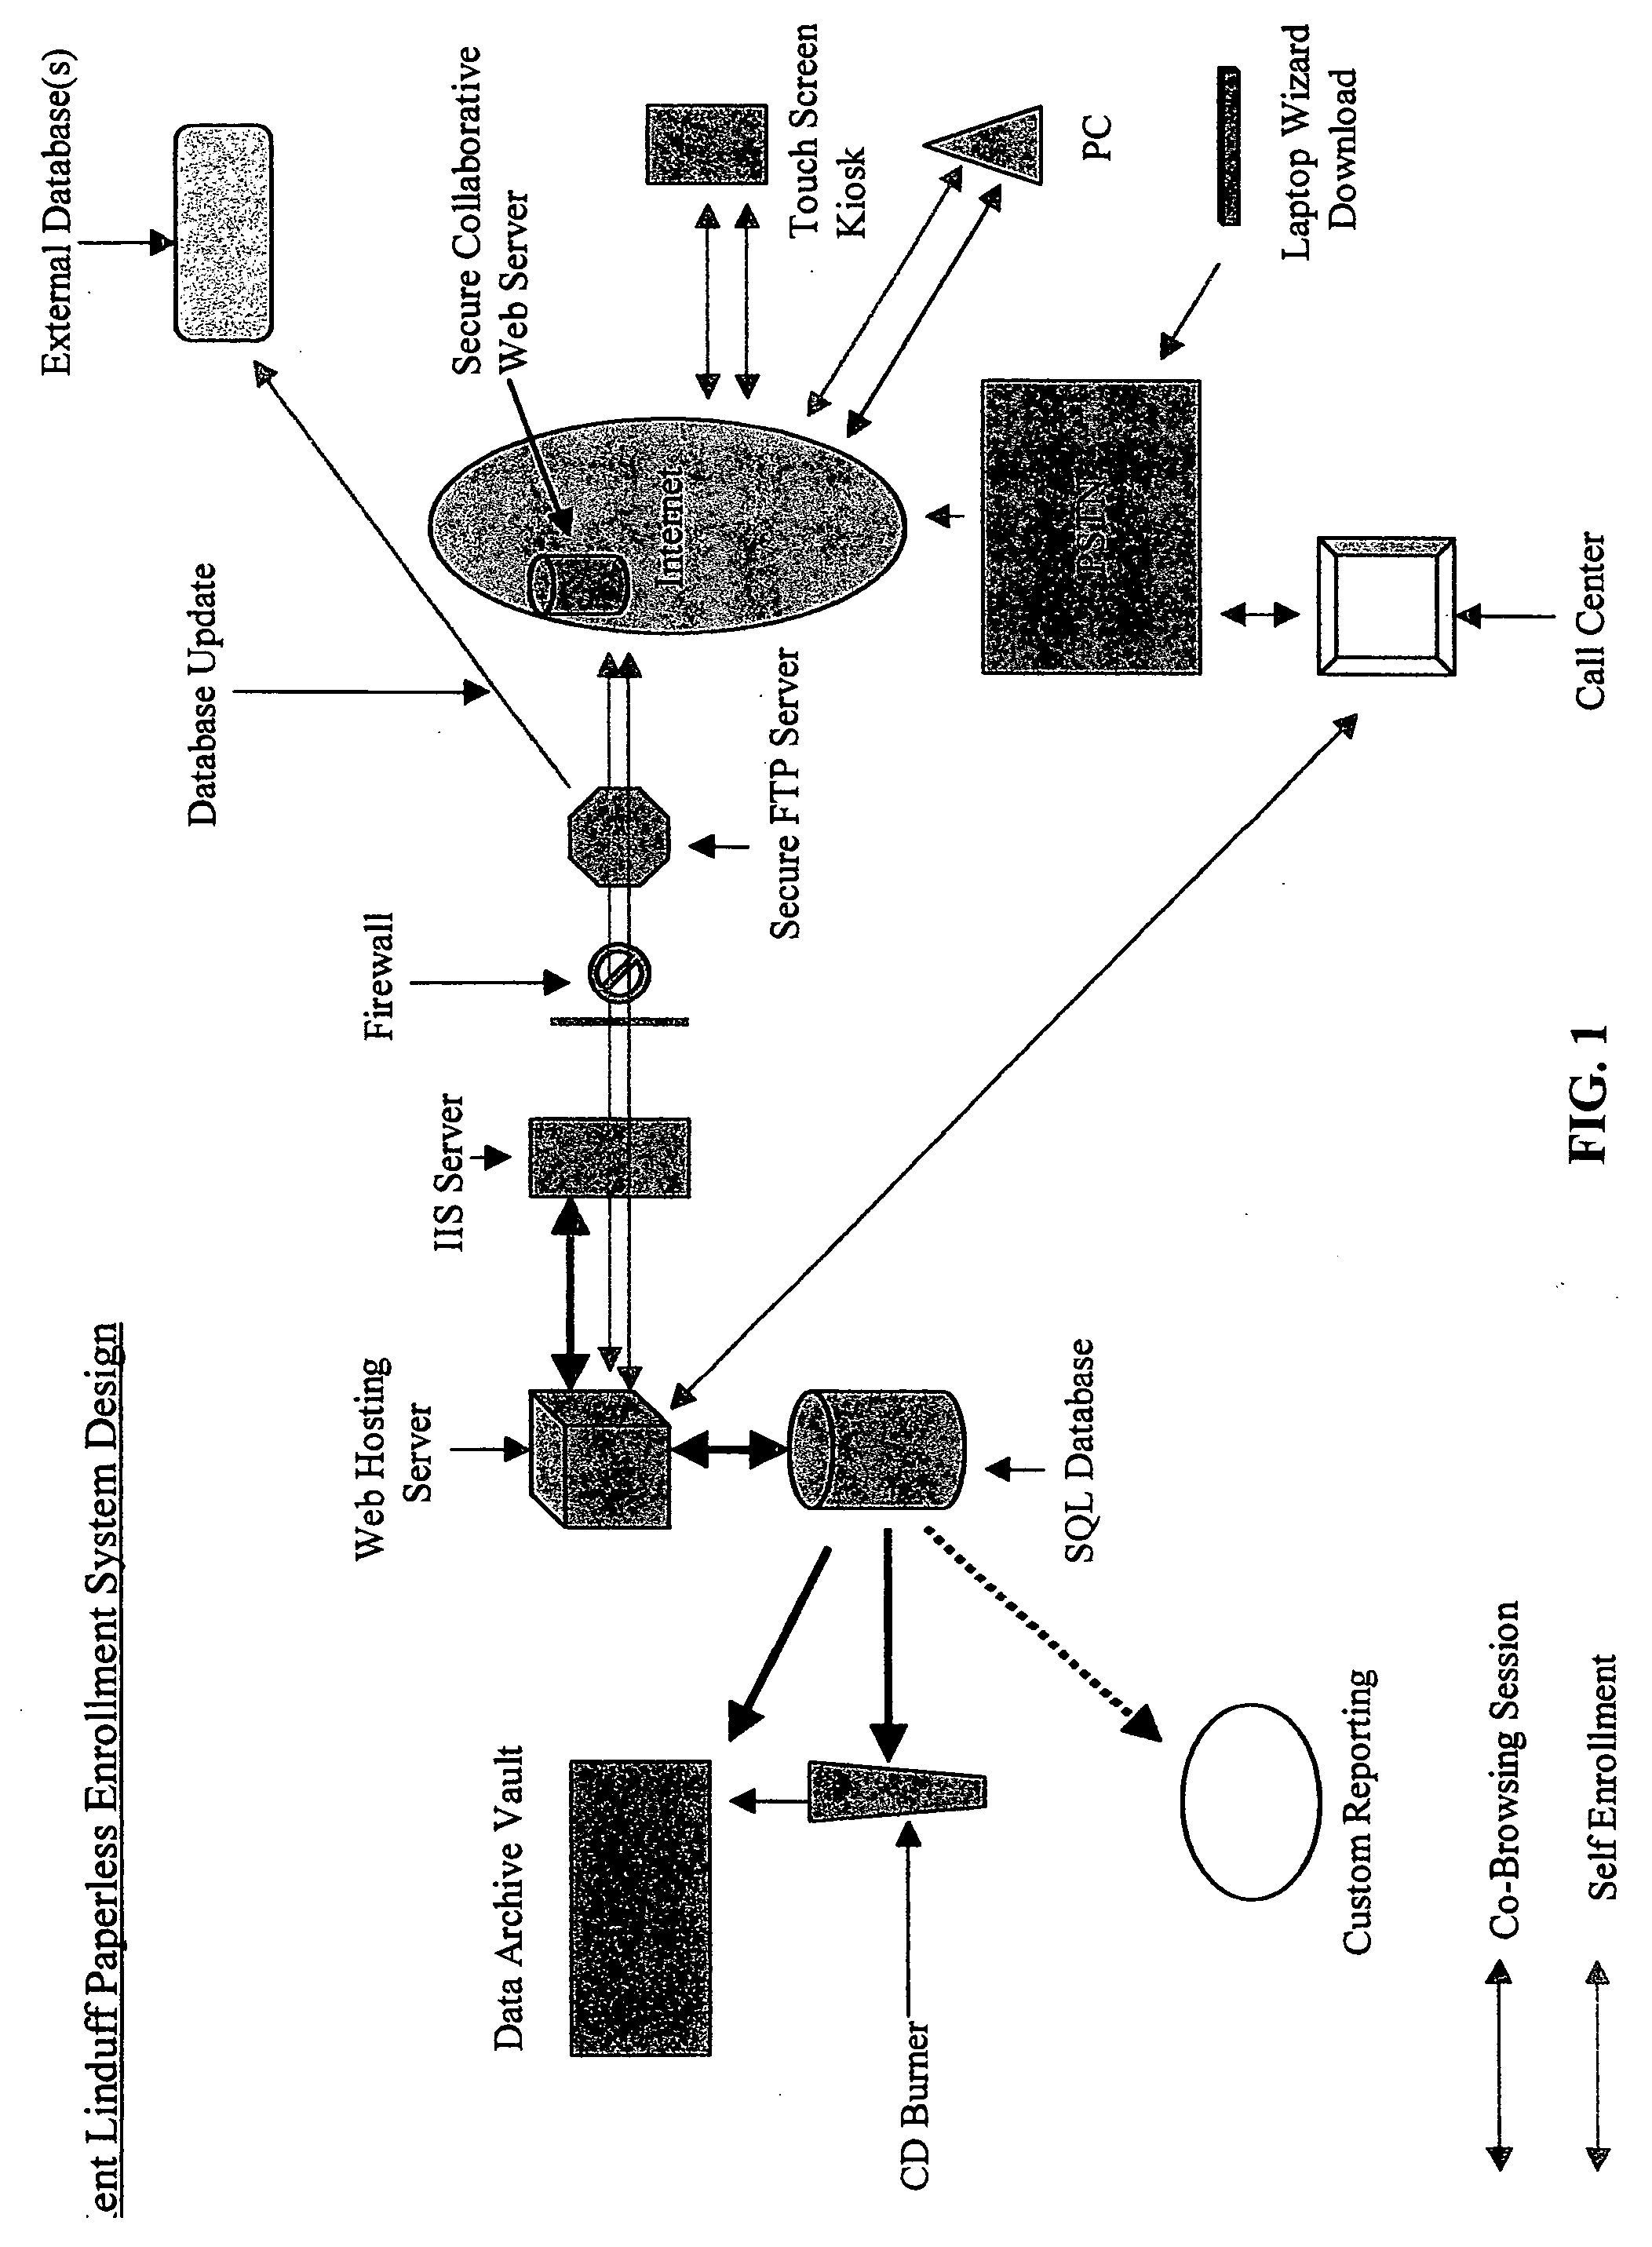 System and method for managing information in a group participant purchasing environment